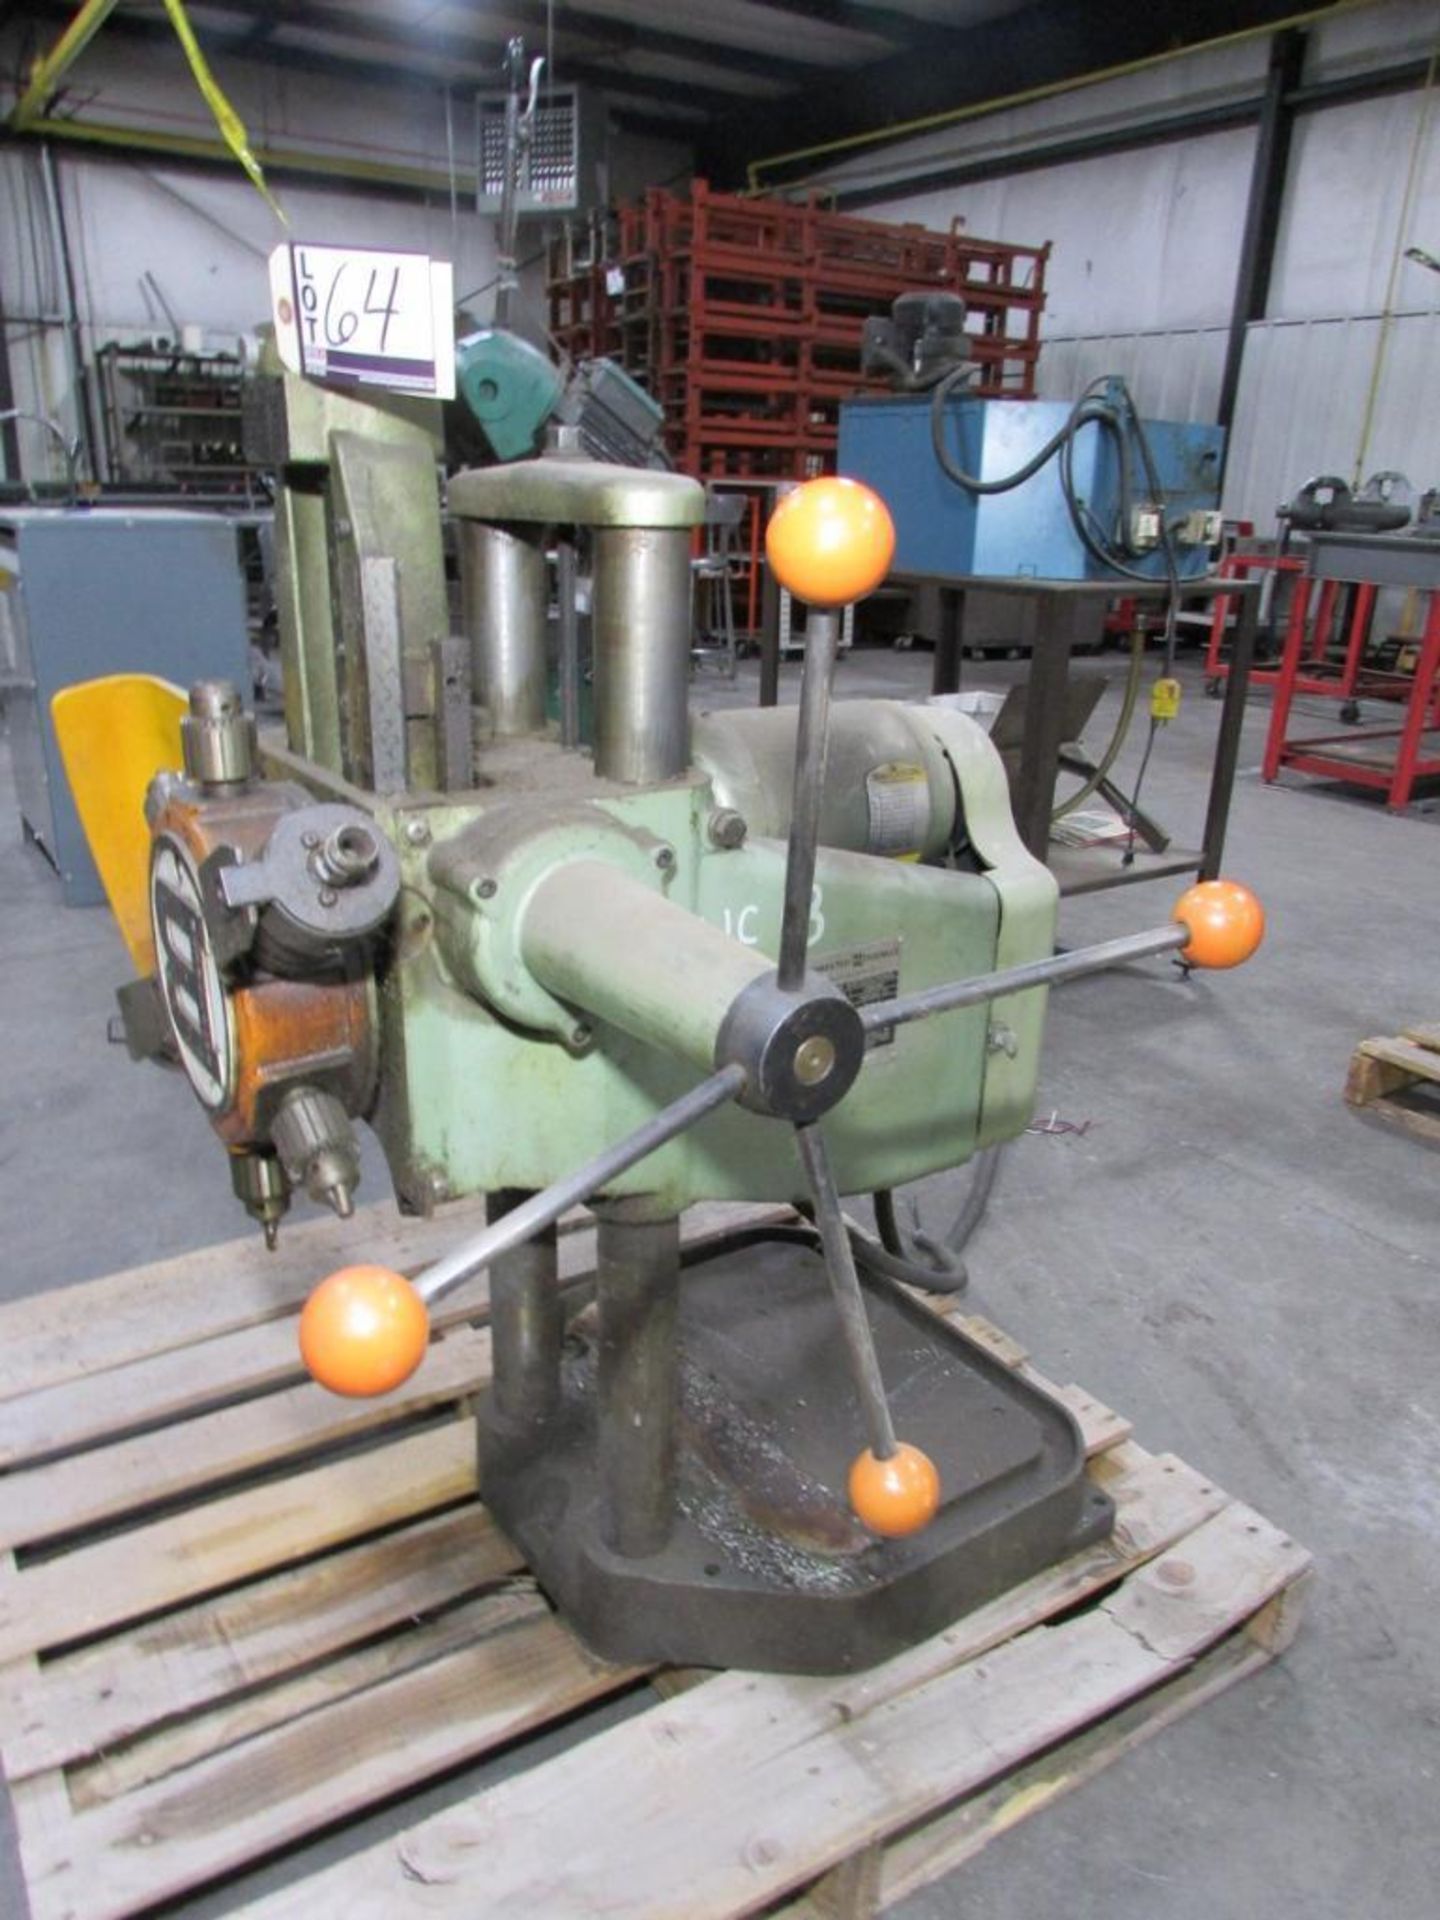 Burgmaster Houdaille 16" 6 Position Turret Drill Press, 6" Stroke, (4) 5/8" Jacobs Chucks, (2) Accut - Image 3 of 12